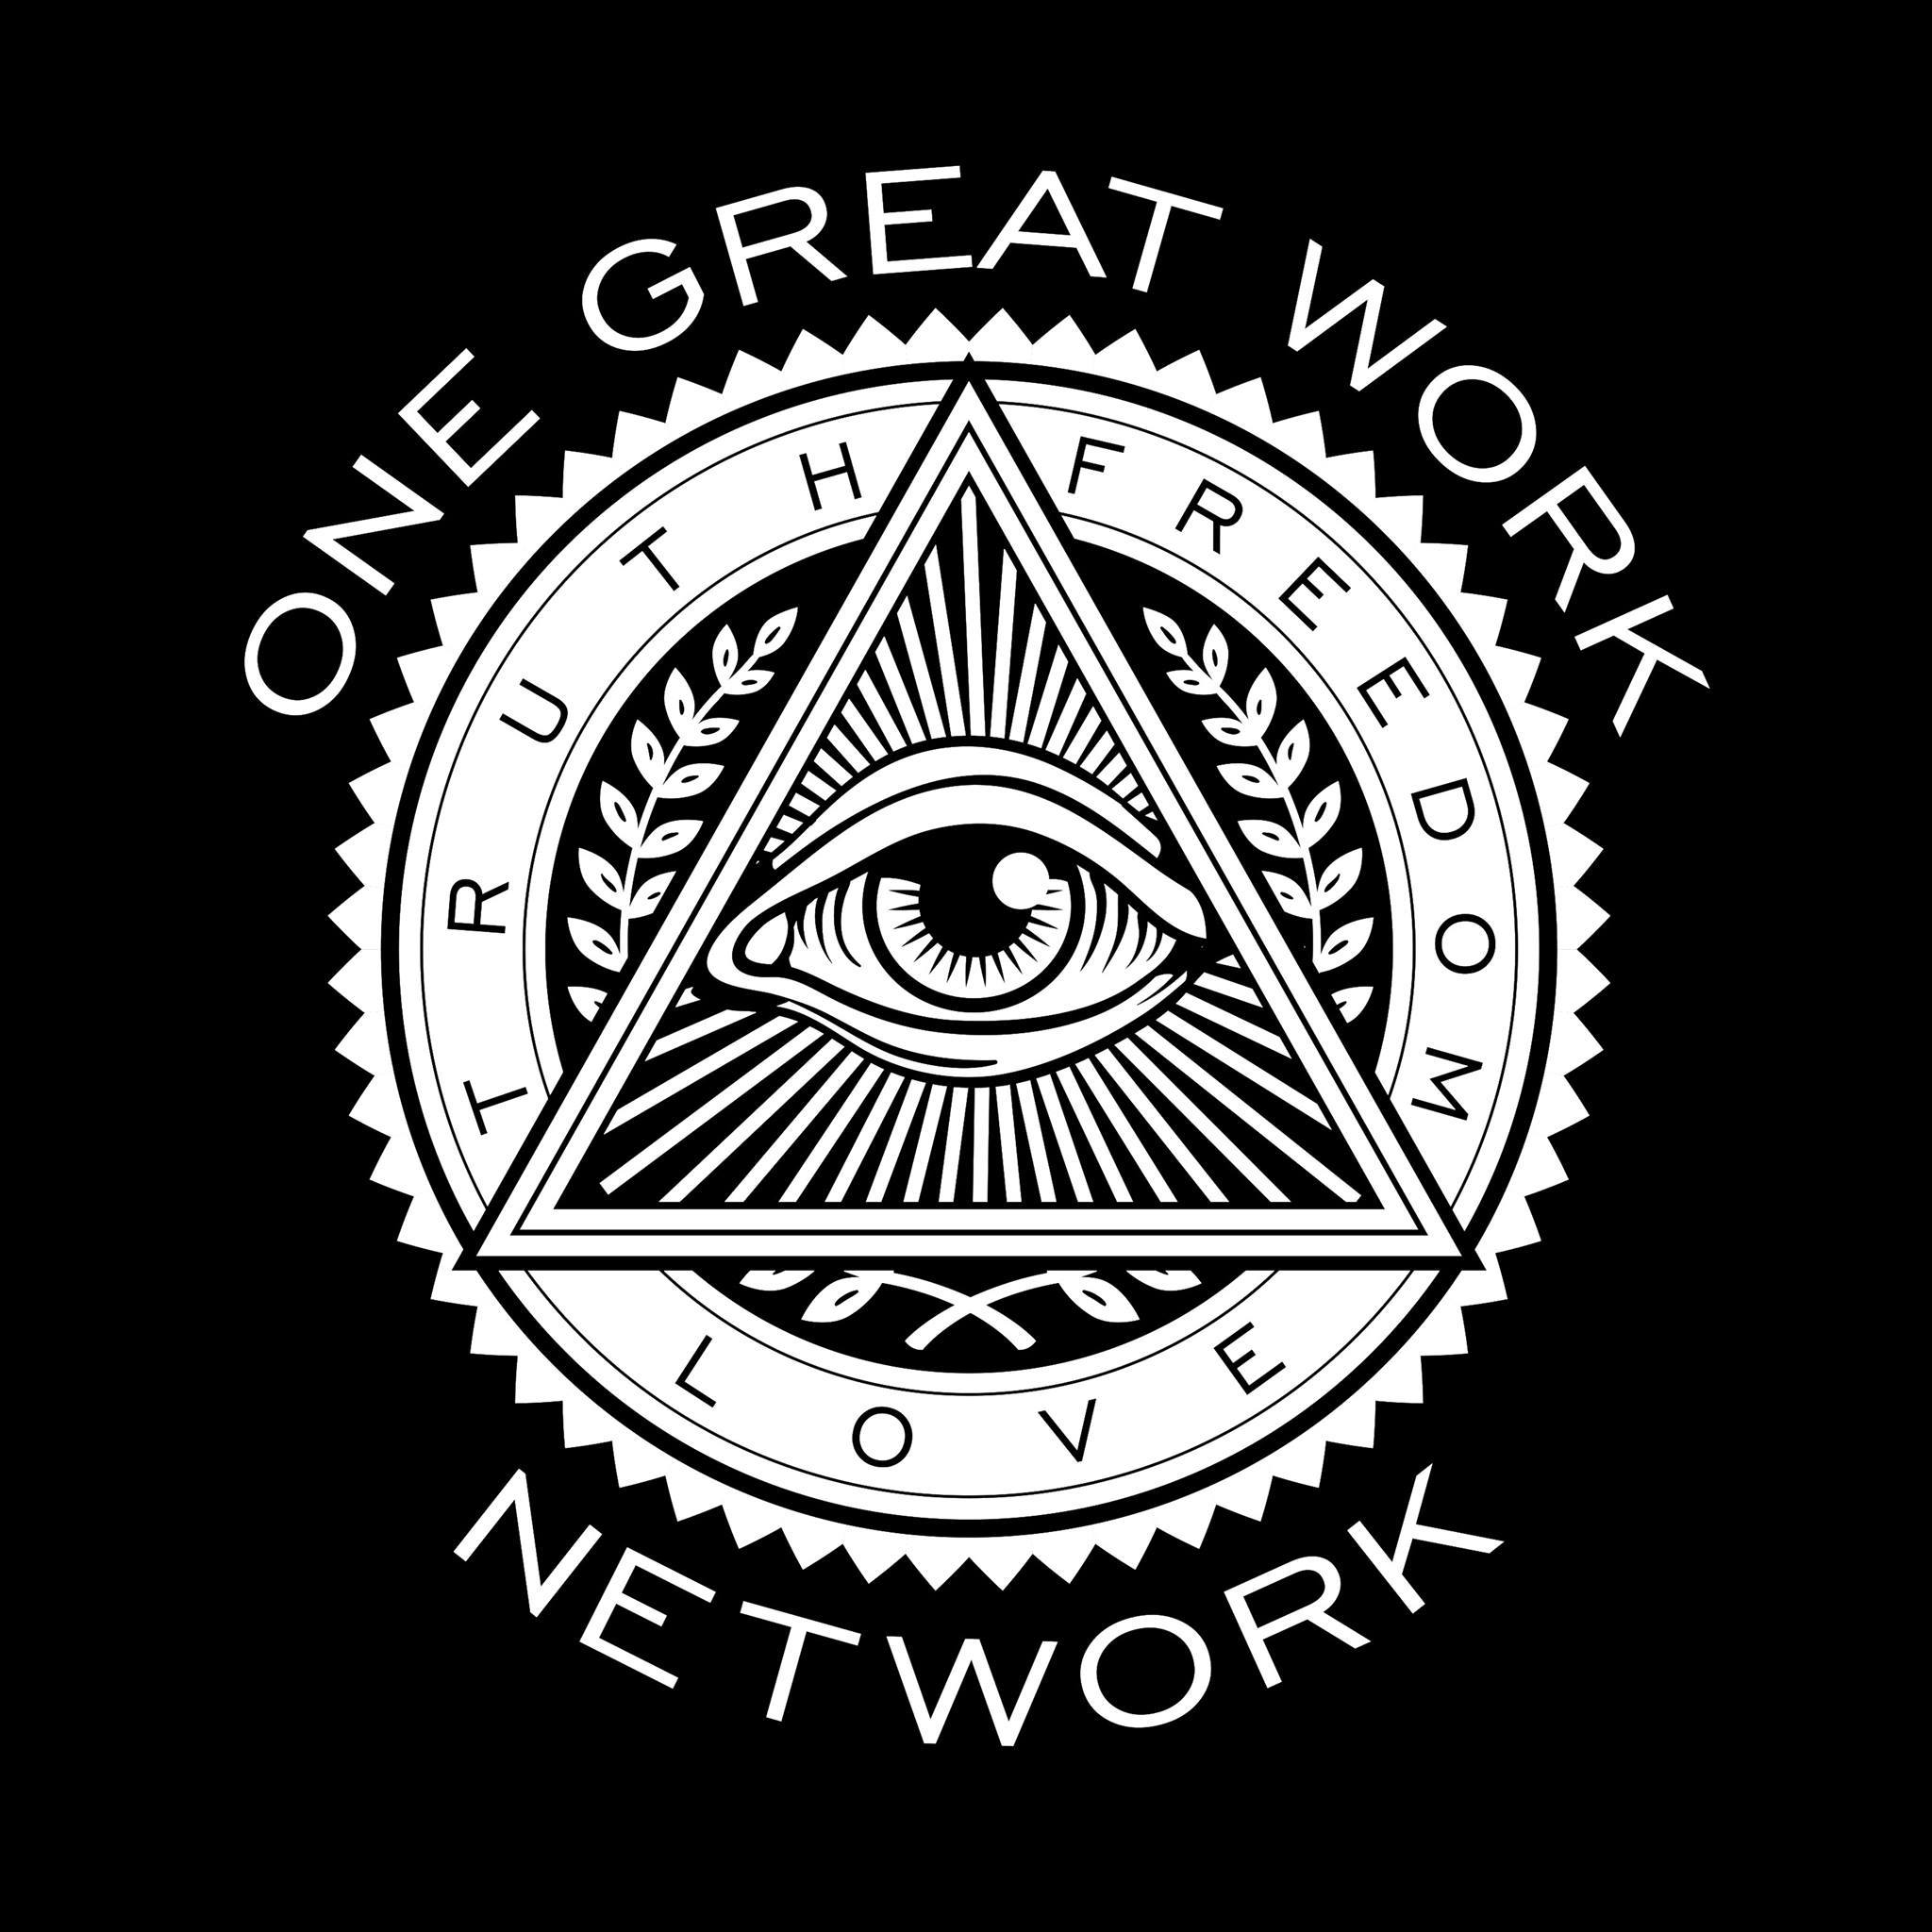 ONE GREAT WORK NETWORK